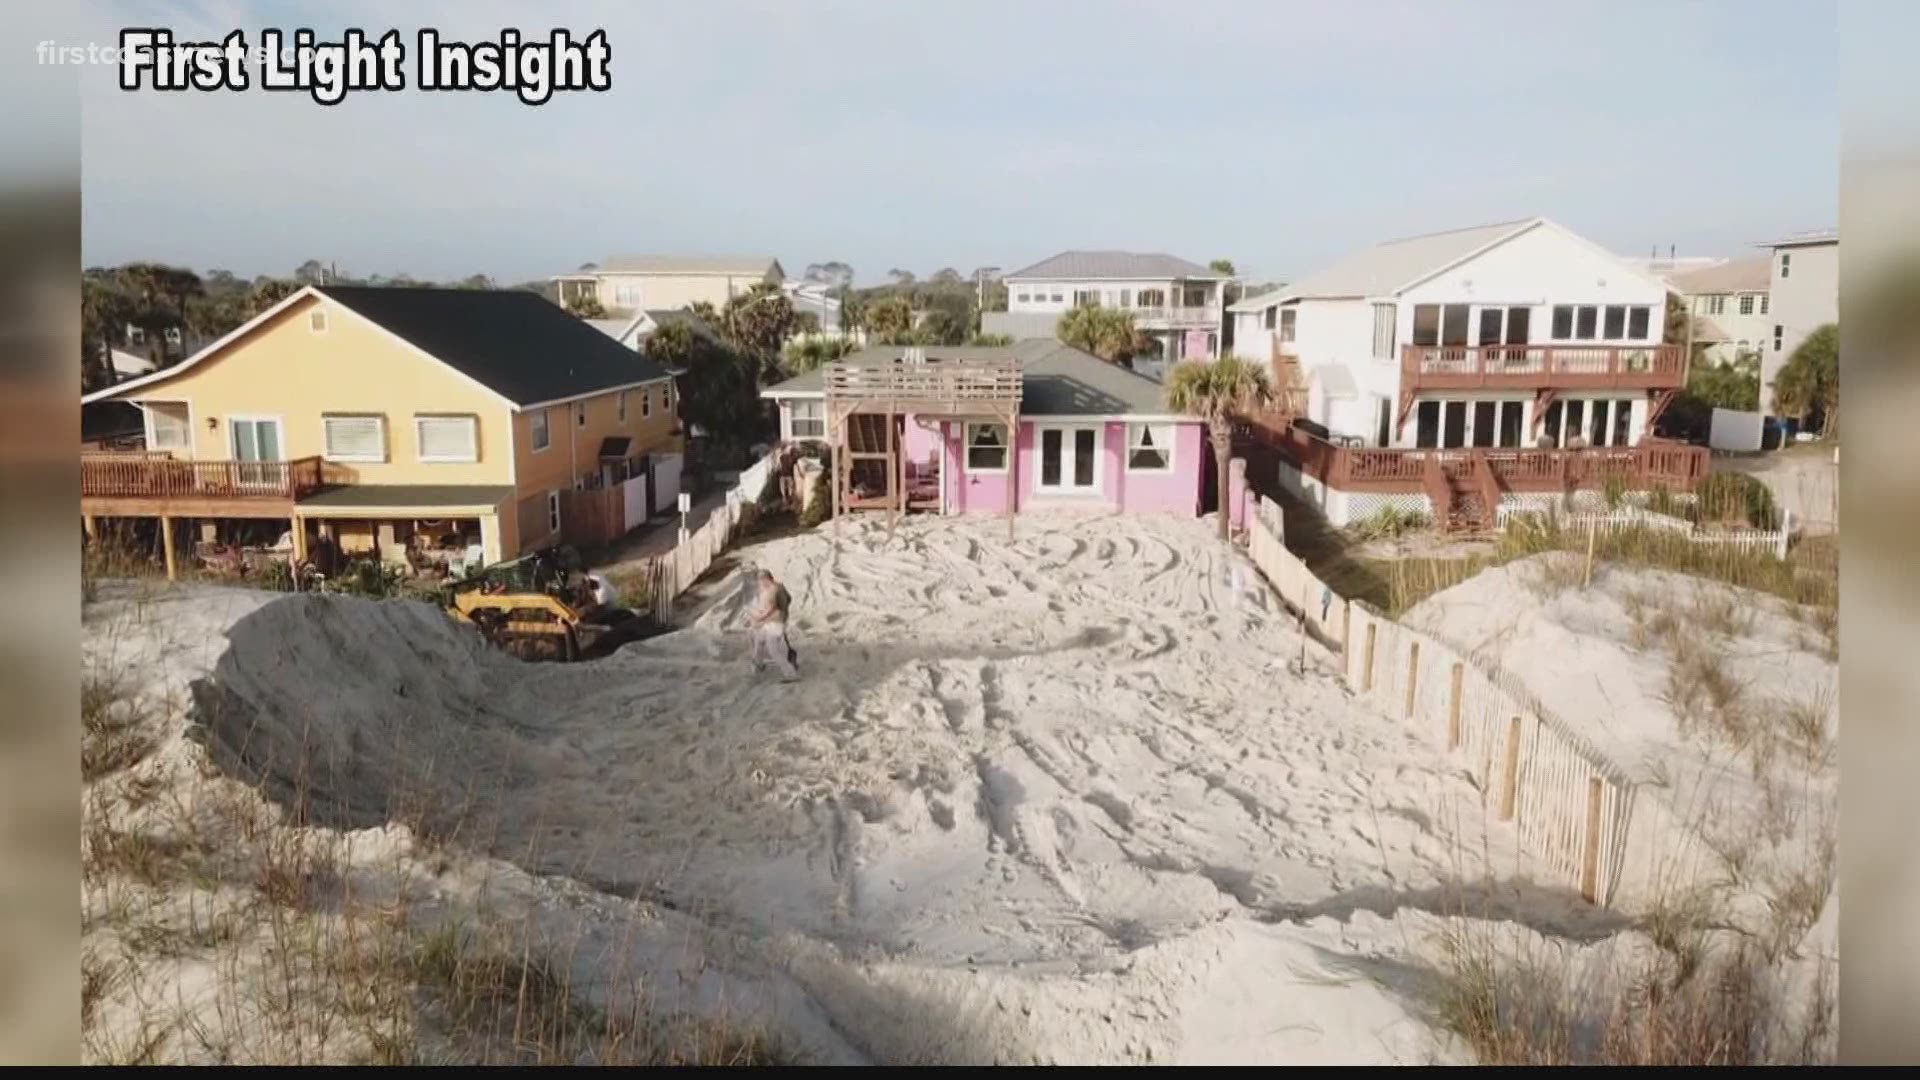 The permit claimed the dune was excavated due to sand blowing on the property. The property's listing on Zillow now advertises an "outstanding panoramic ocean view."